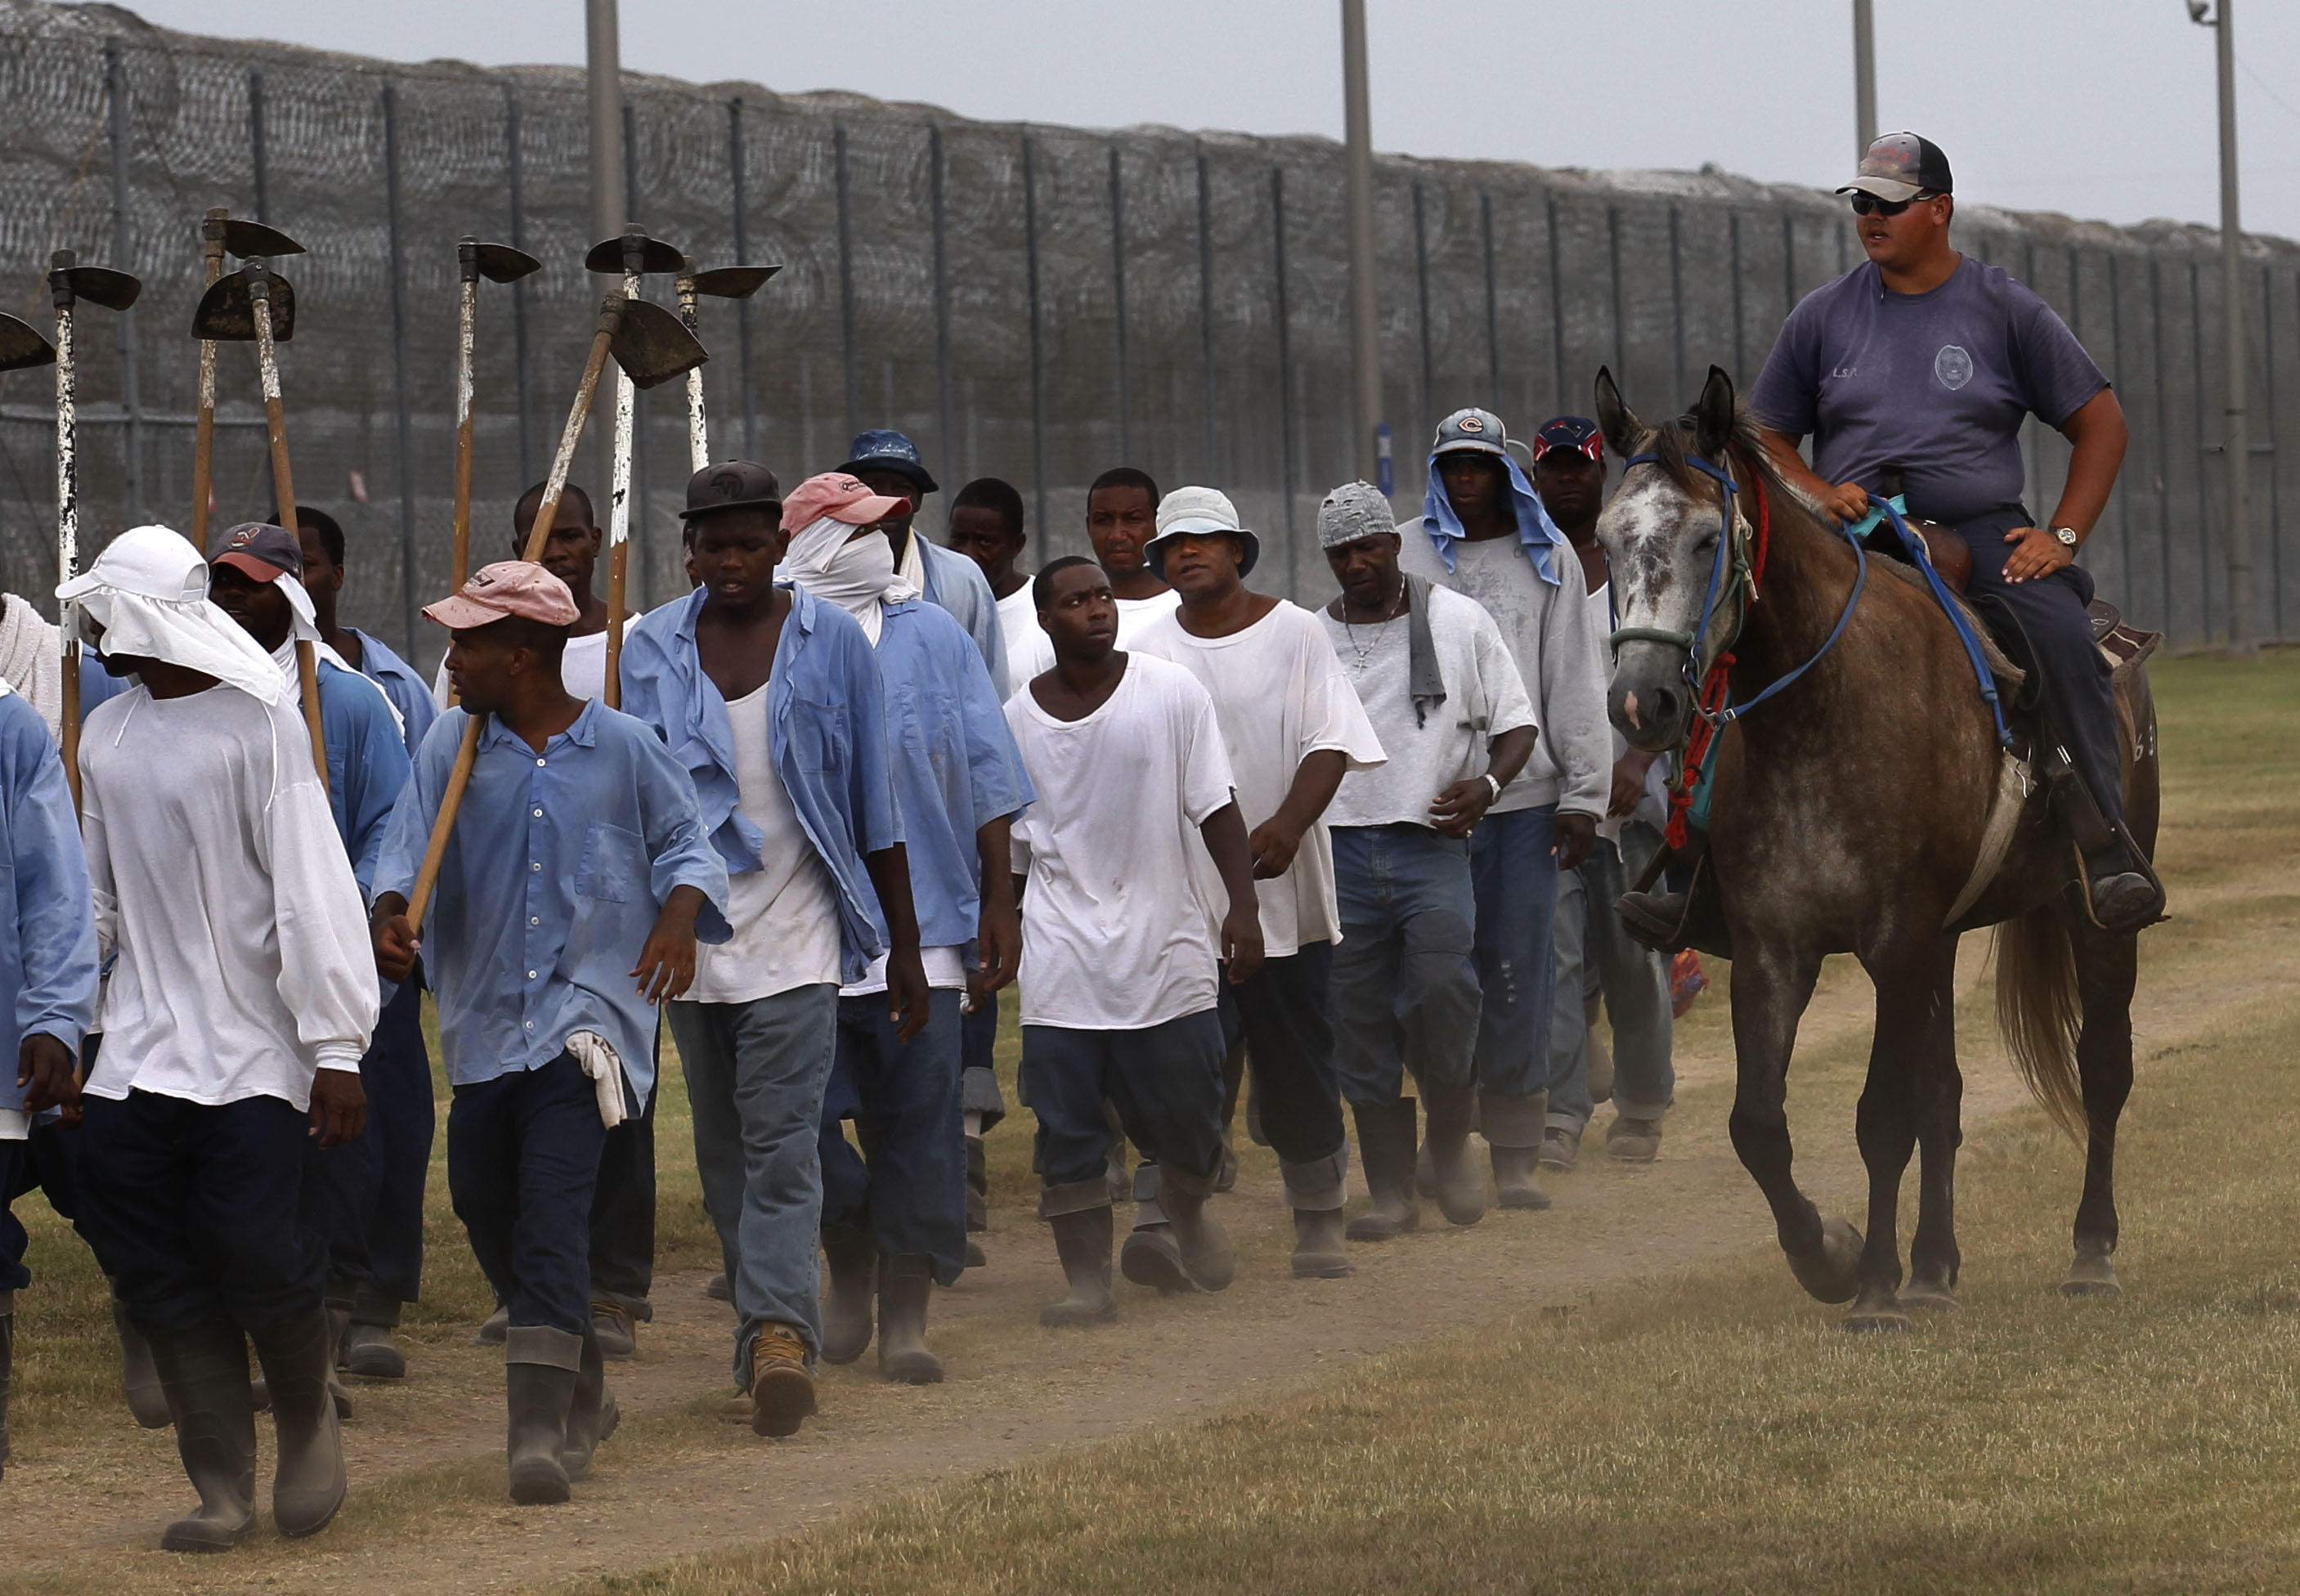 Corporations are Making Millions of Dollars From U.S. Prison Labor